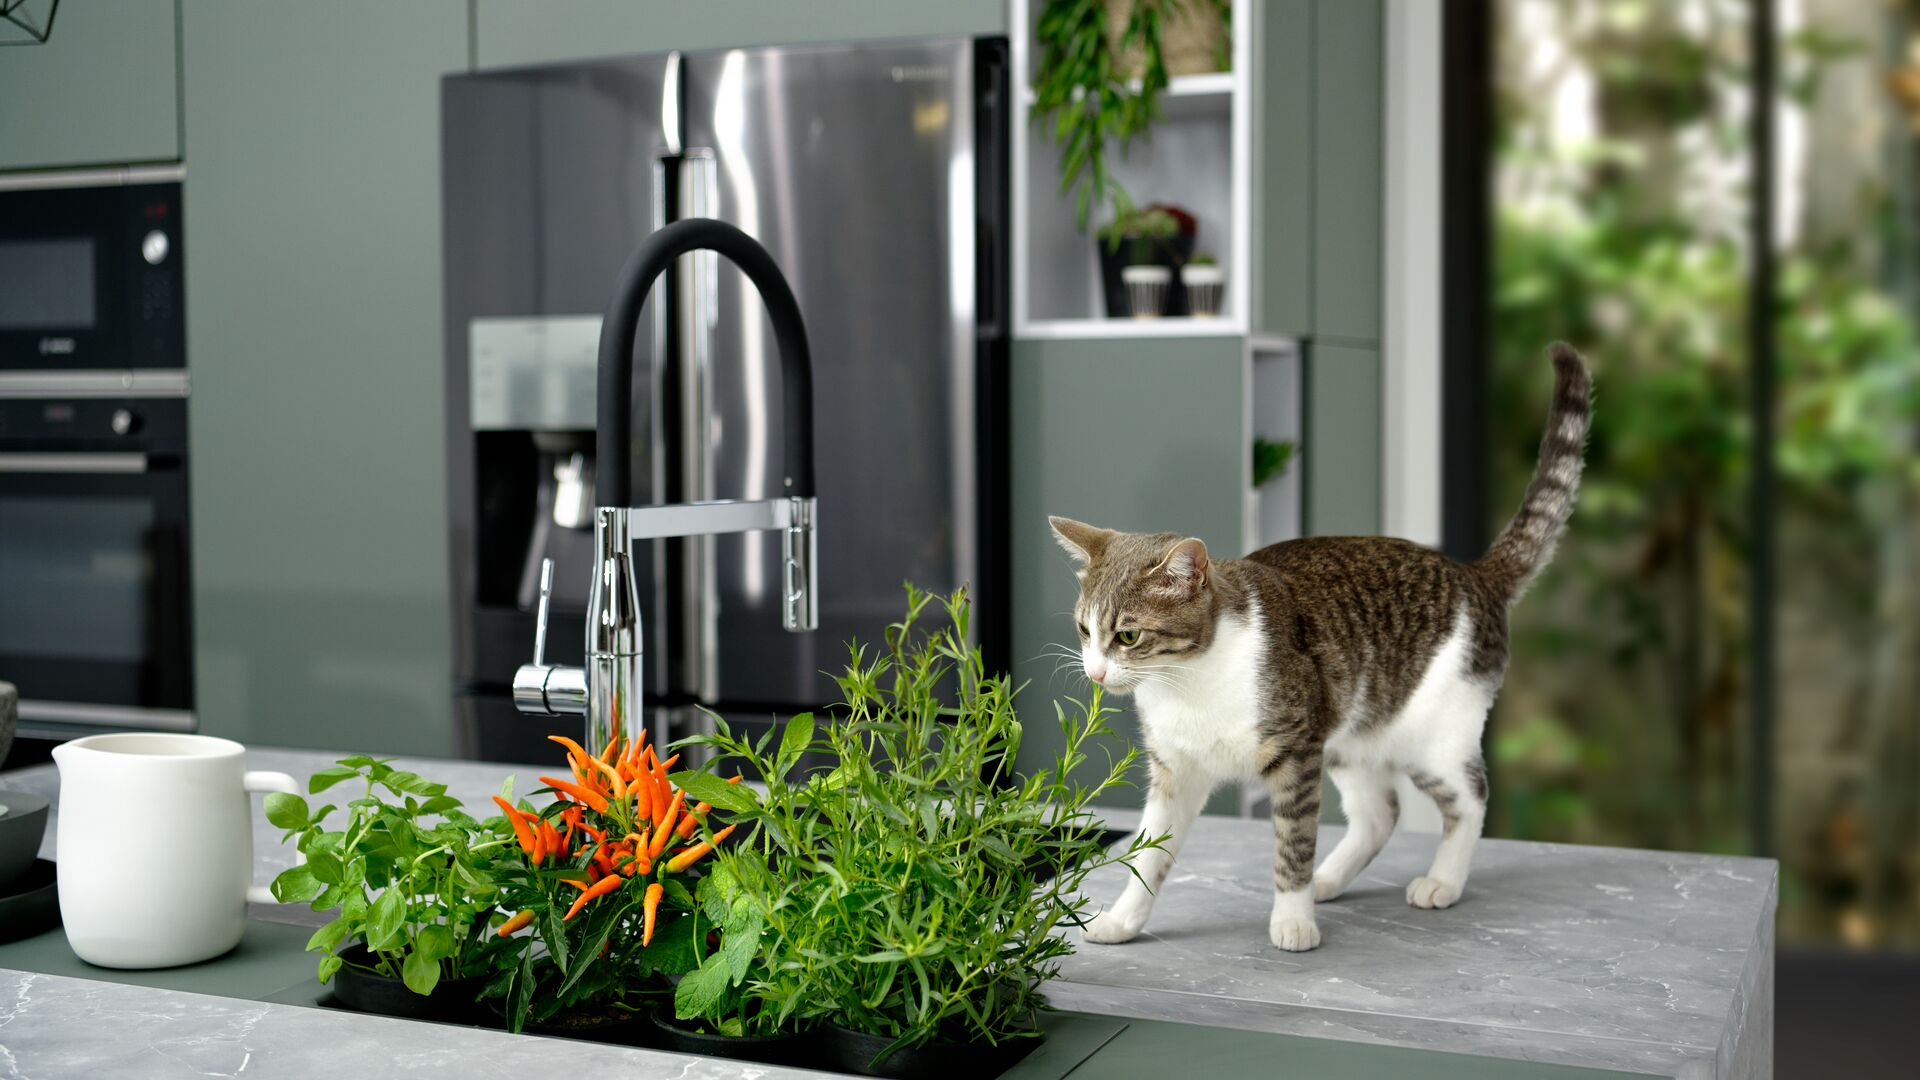 Planter in the kitchen for catnip and aromatic plants